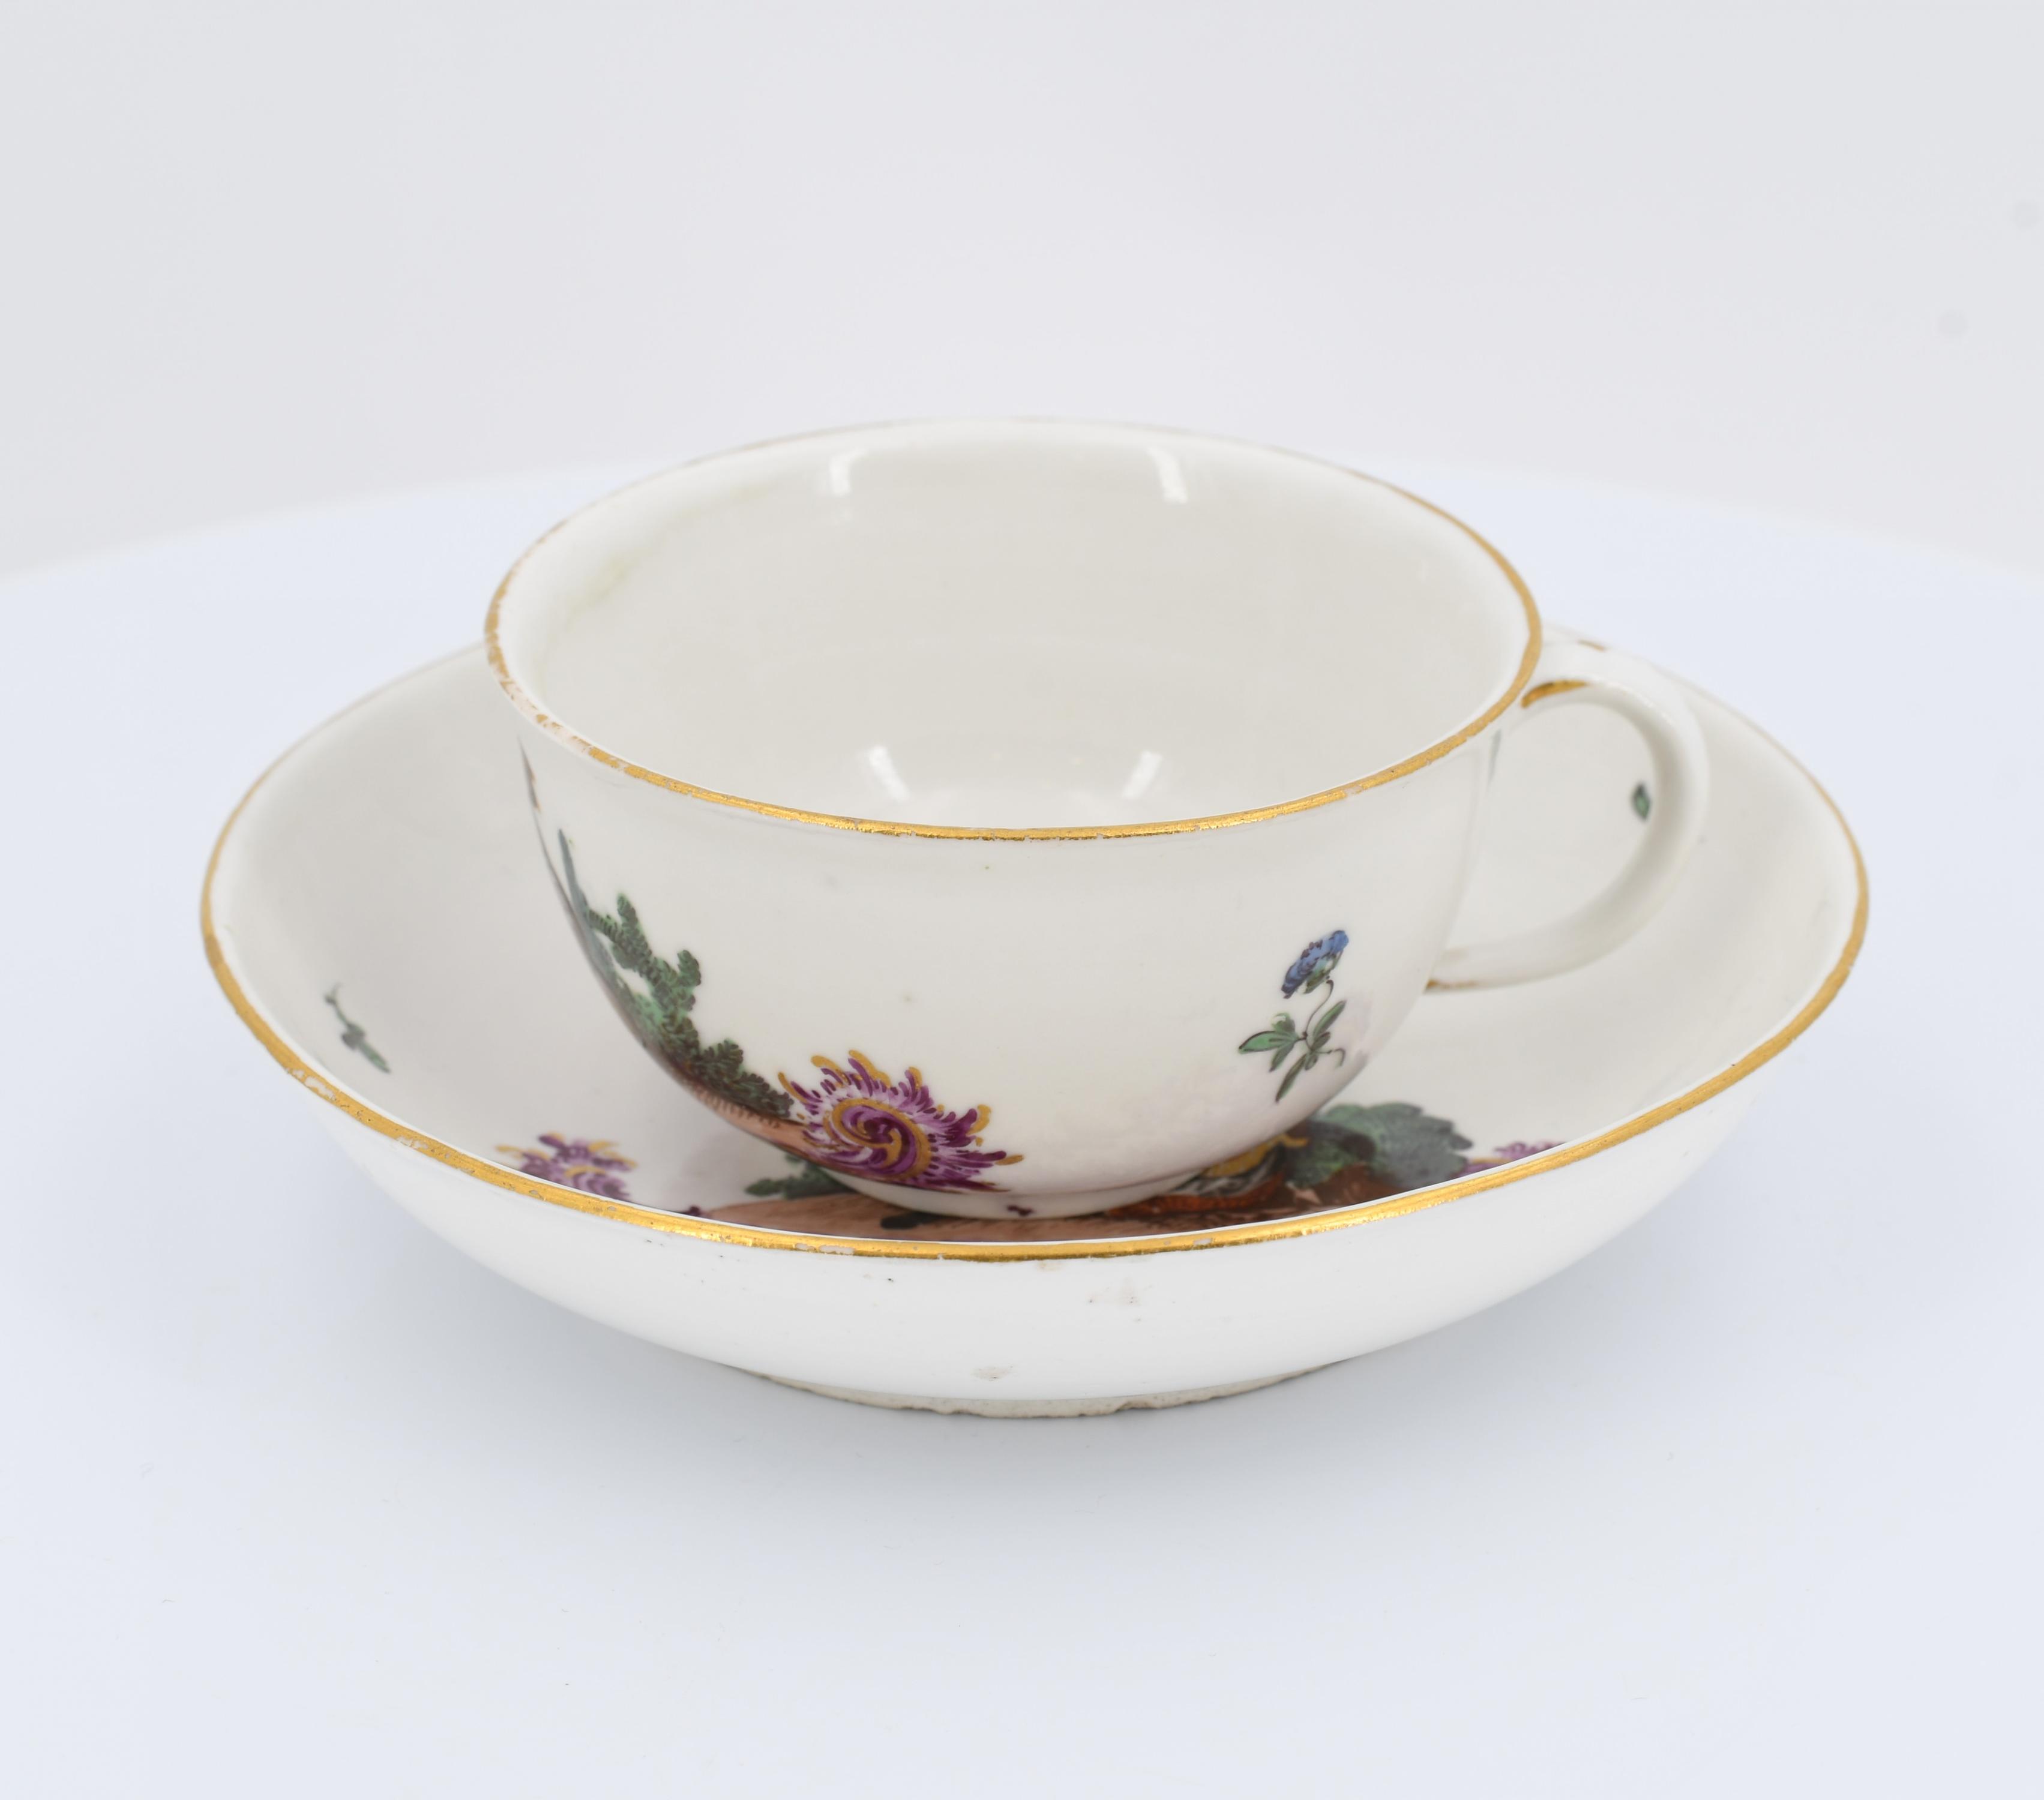 Cup and saucer with chinoiseries - Image 2 of 7